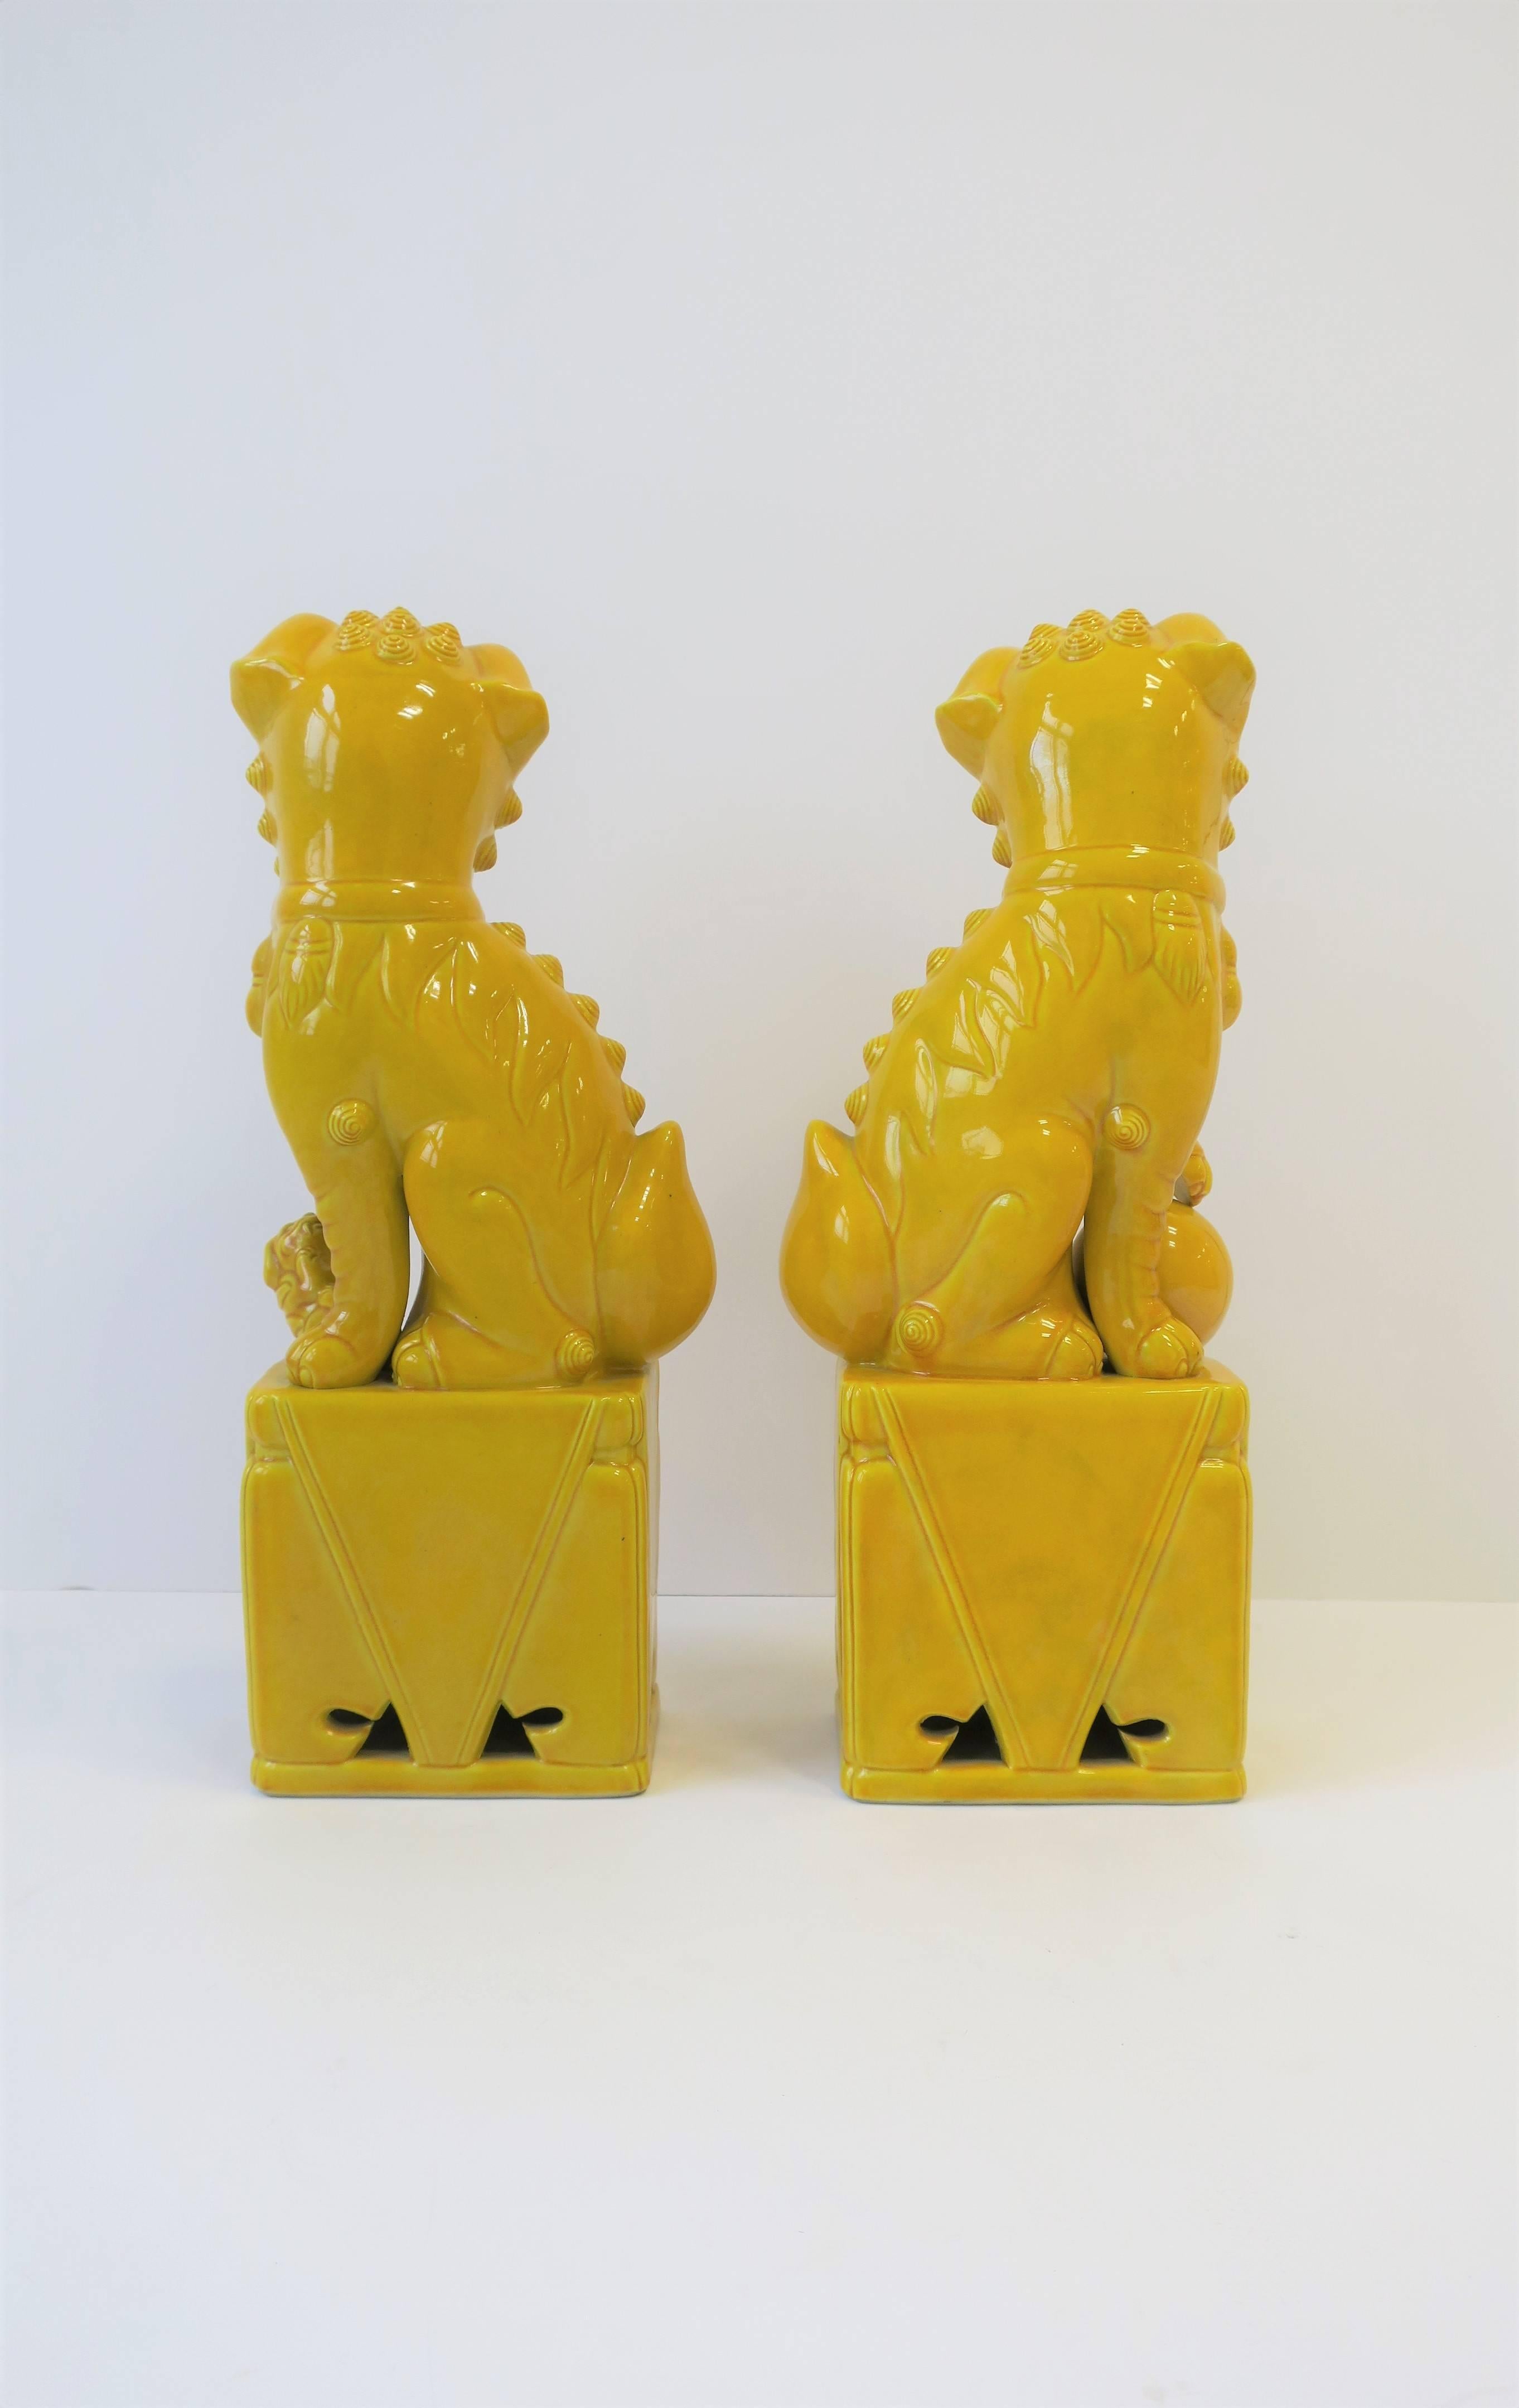 Pair of Tall Midcentury Yellow Foo Dogs or Lion Sculptures  1